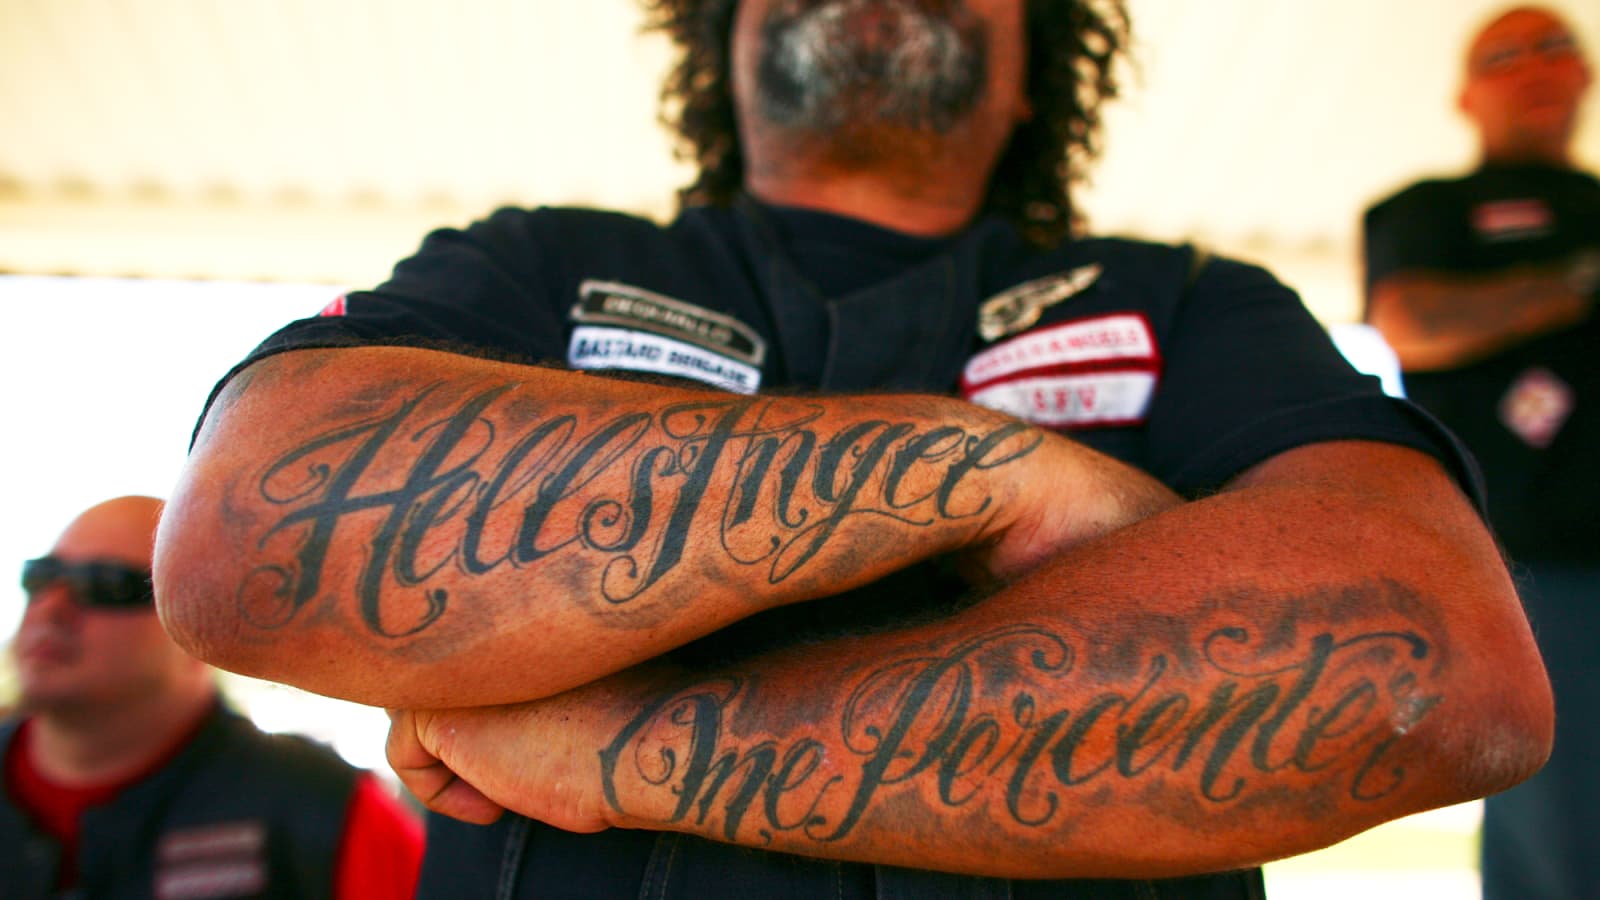 Despite outlaw image, Hells Angels sue often